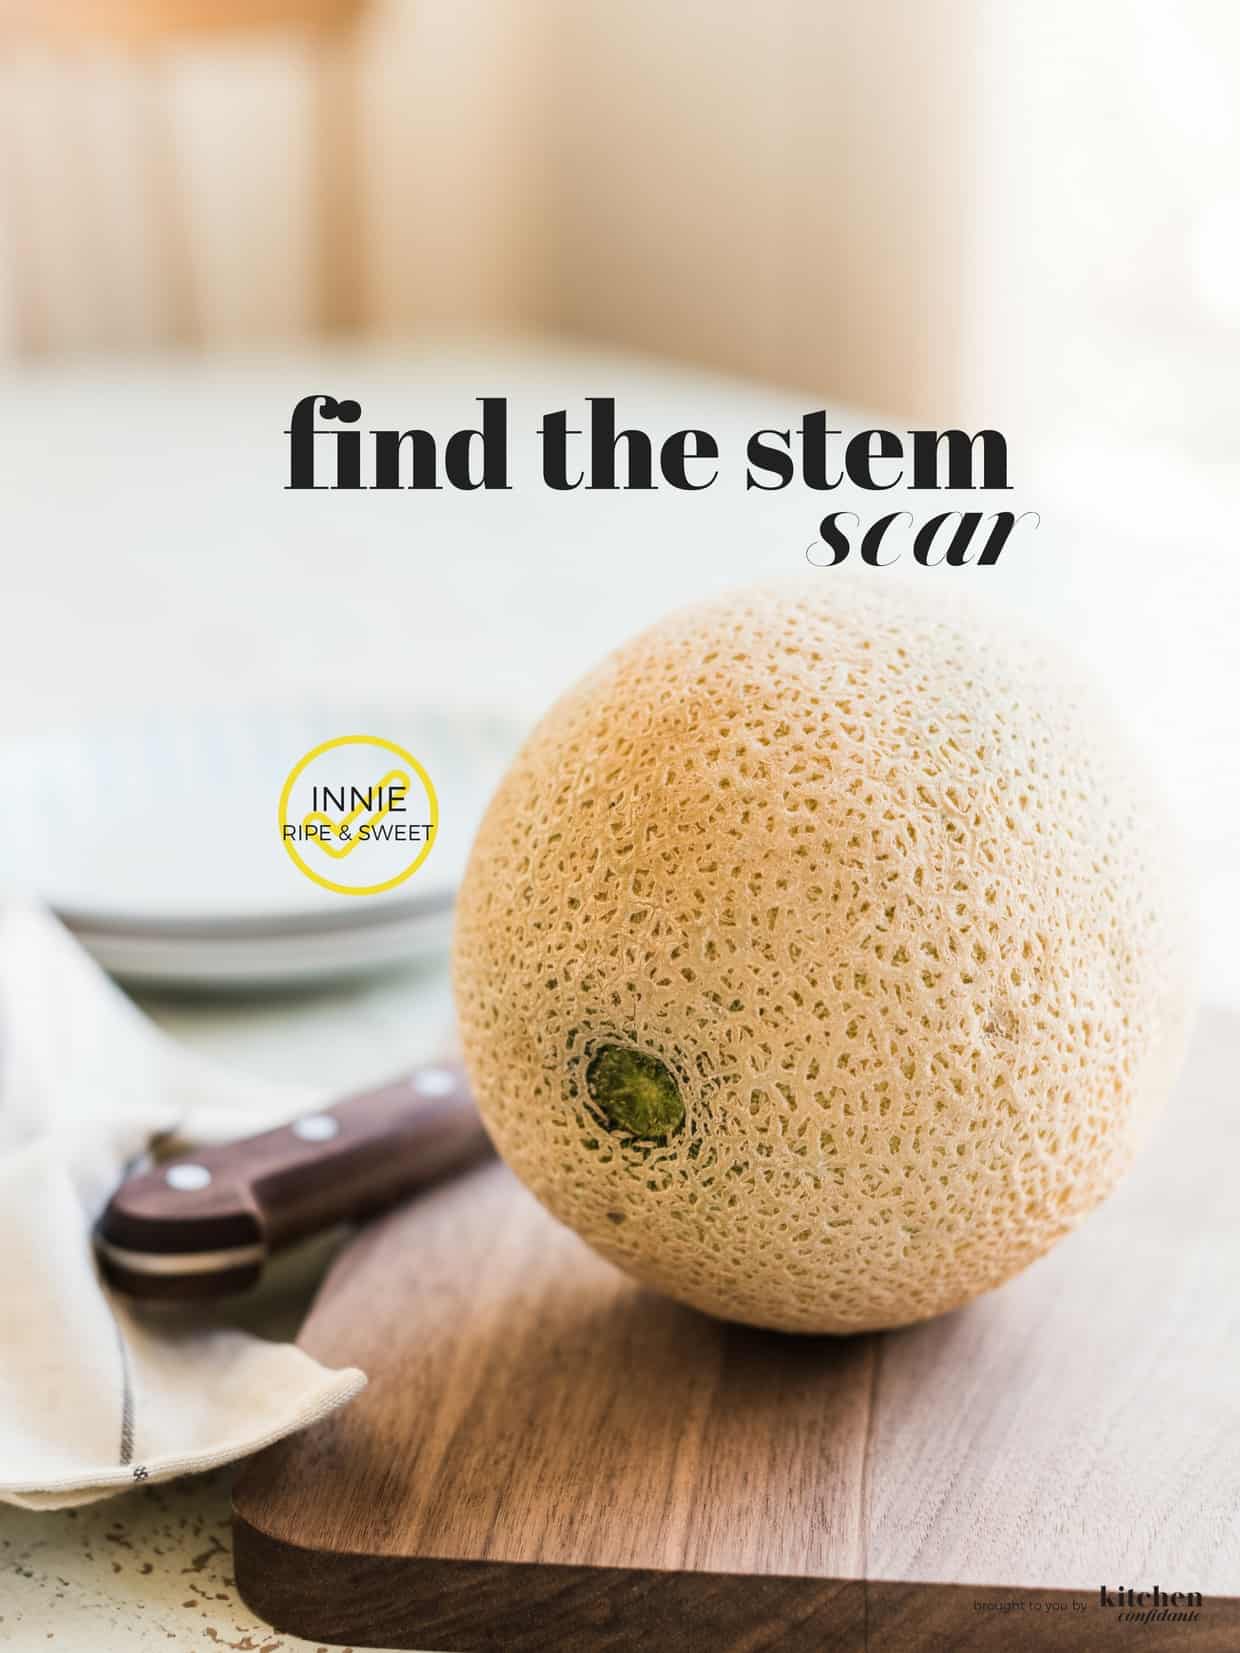 Ripe cantaloupe on a wooden cutting board. Text reads: "Find the Stem Scar", then "Innie = ripe & sweet". The image of the cateloupe has a depressed stem scar which indicates that it is ripe.